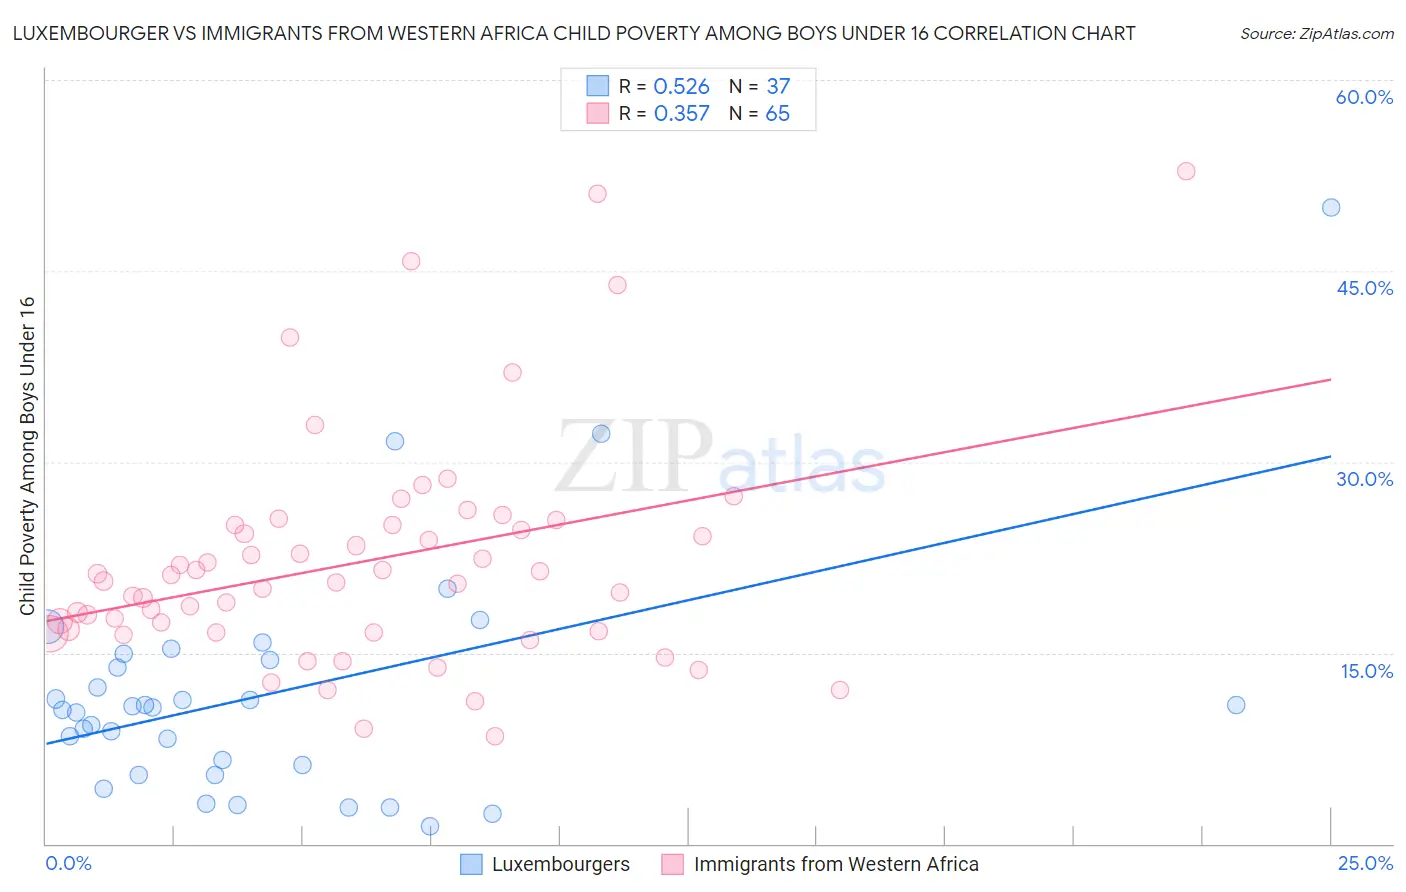 Luxembourger vs Immigrants from Western Africa Child Poverty Among Boys Under 16